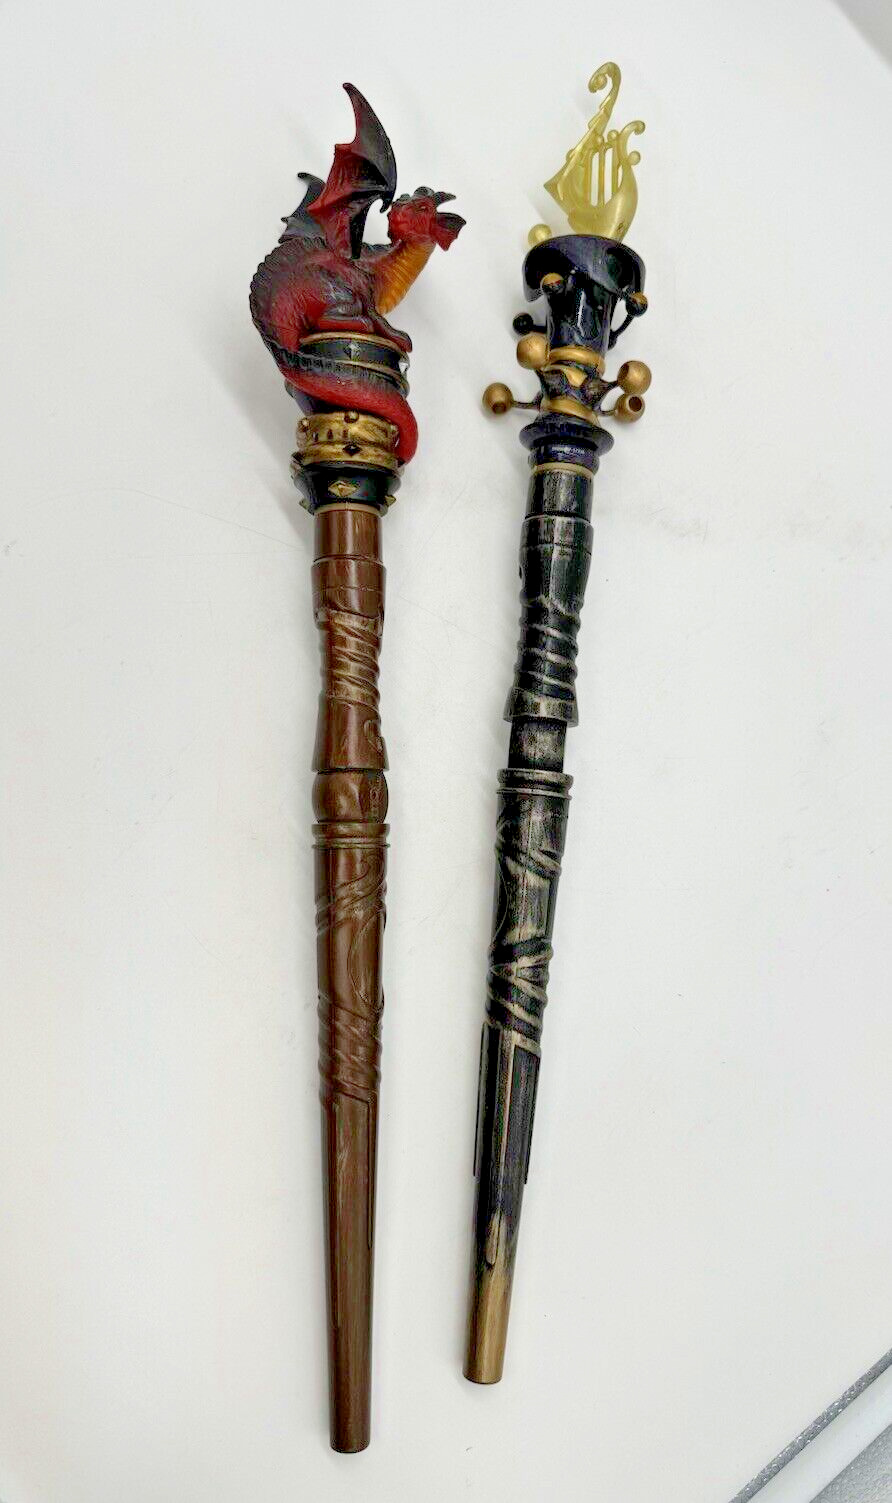 Magiquest Great Wolf Lodge Red Dragon Gem & Trixter's Crown Harp Wands & Toppers